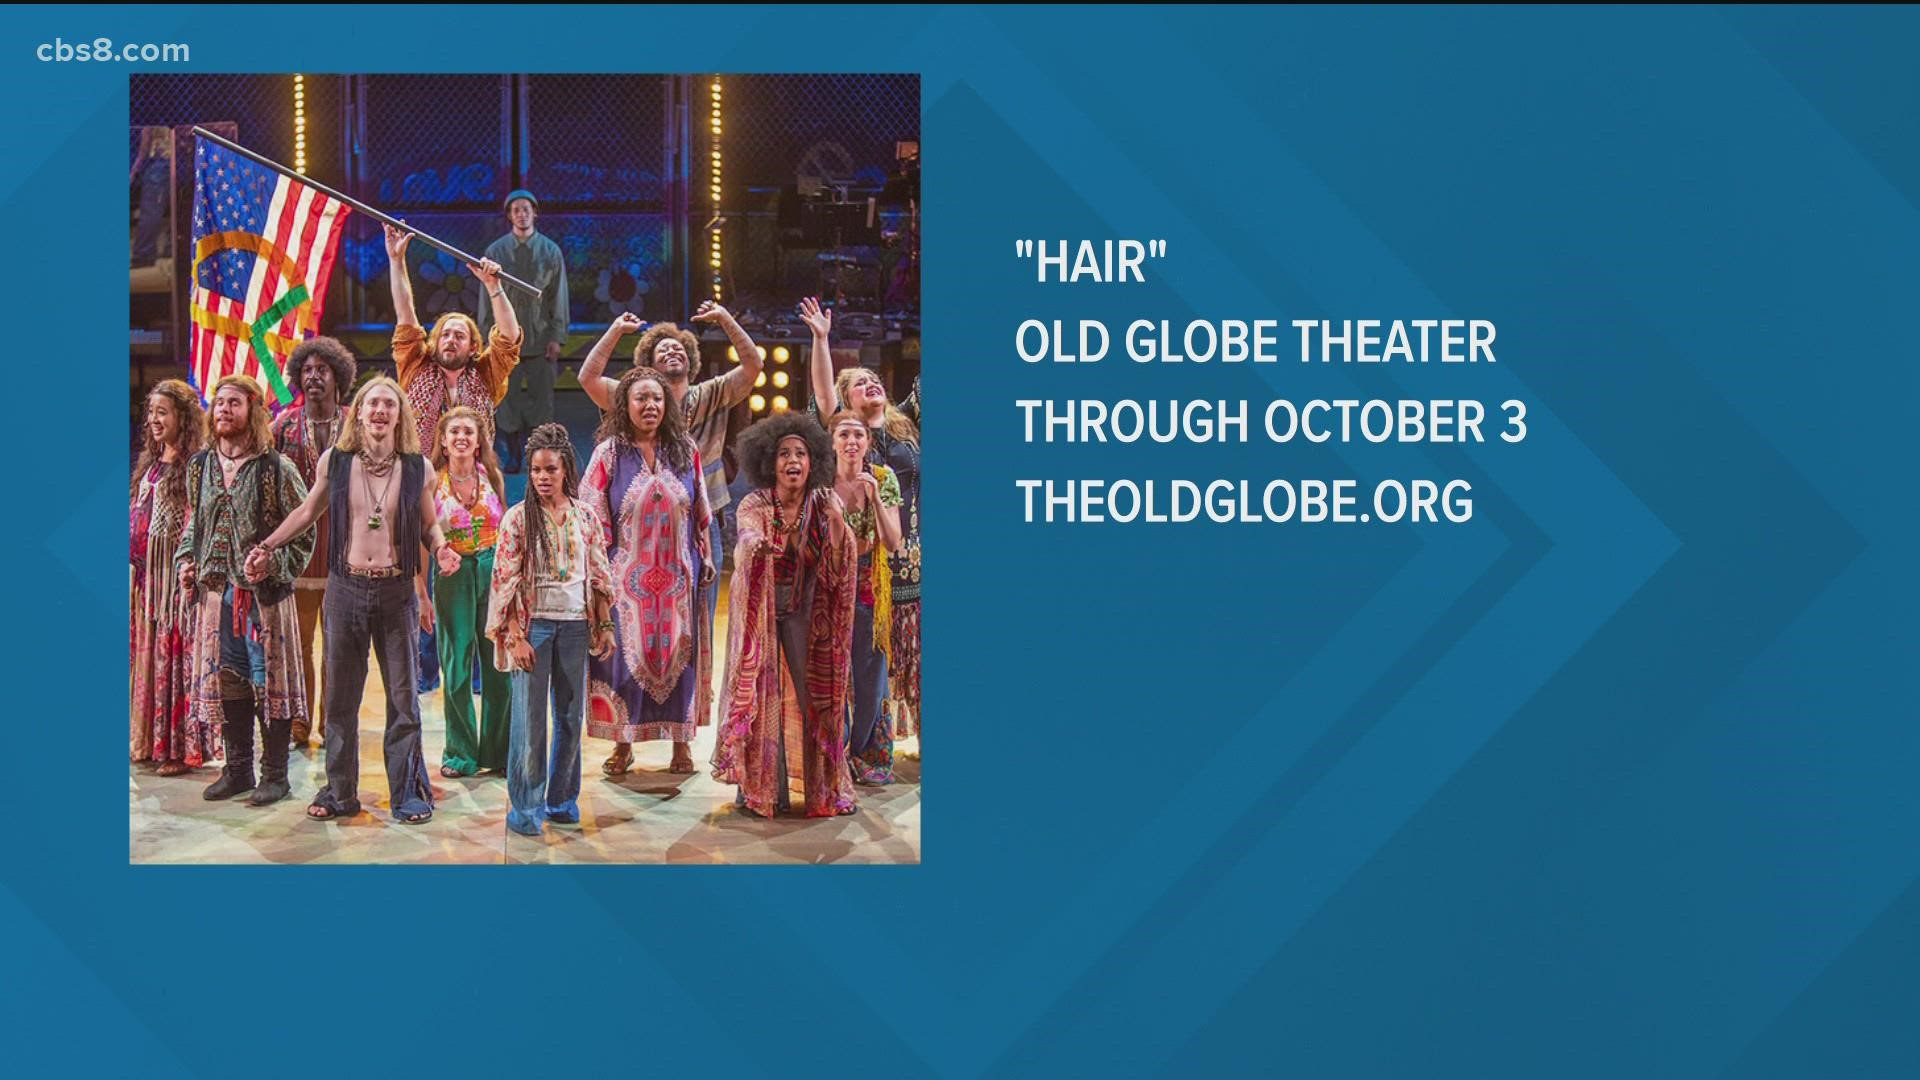 It's the Age Of Aquarius at the Old Globe Theater, as a group of young Americans try to change the world in the new production of the musical "Hair.”